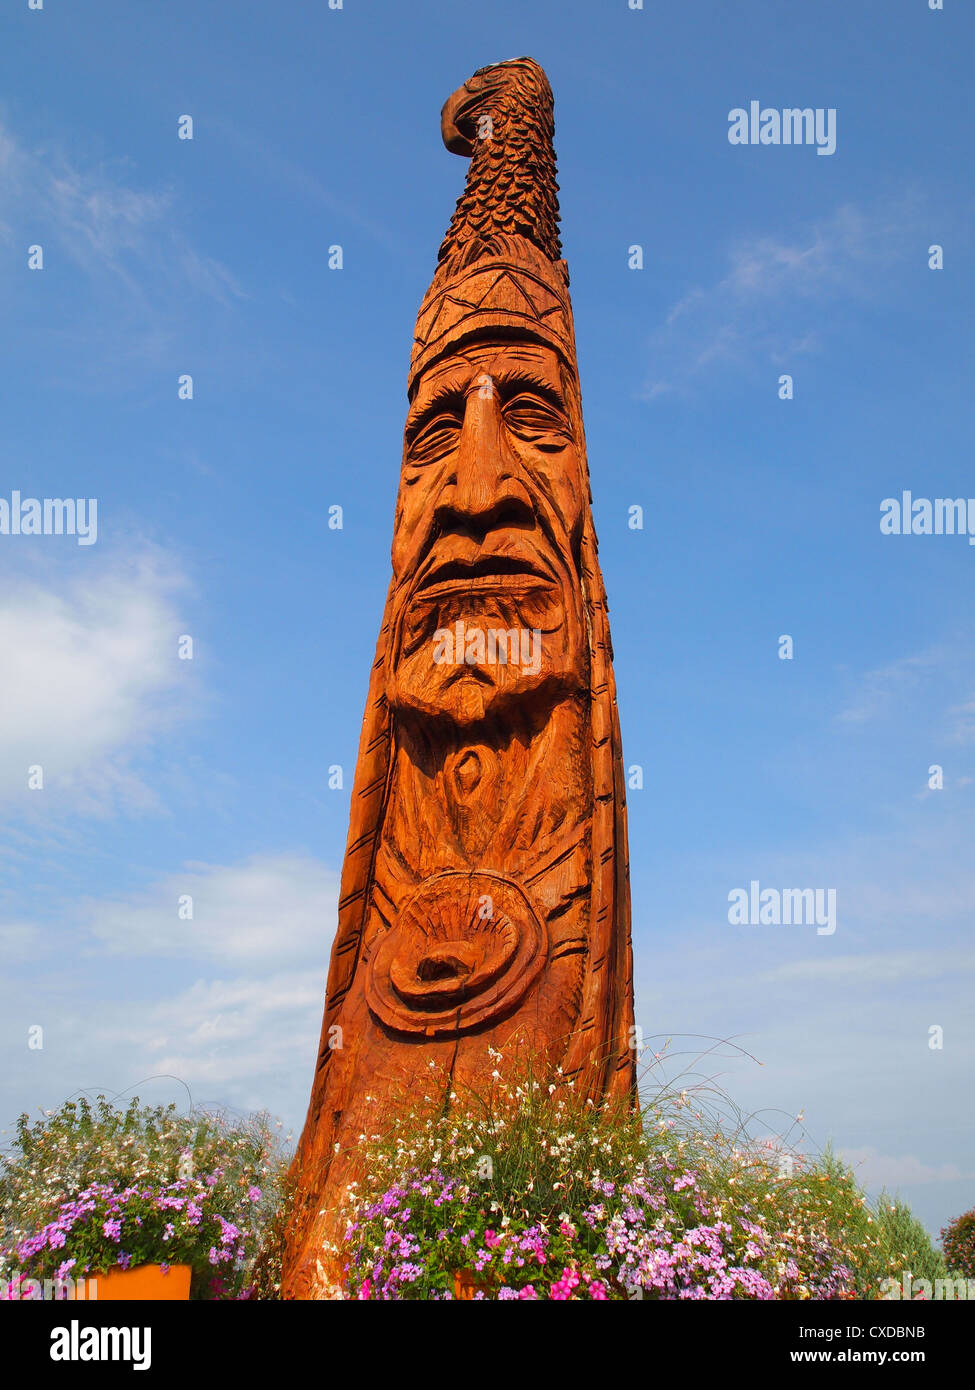 Bethany Beach - August 14: Totem pole in Bethany Beach, DE on August 14, 2012. The pole was designed by sculptor Peter Wolf Toth Stock Photo